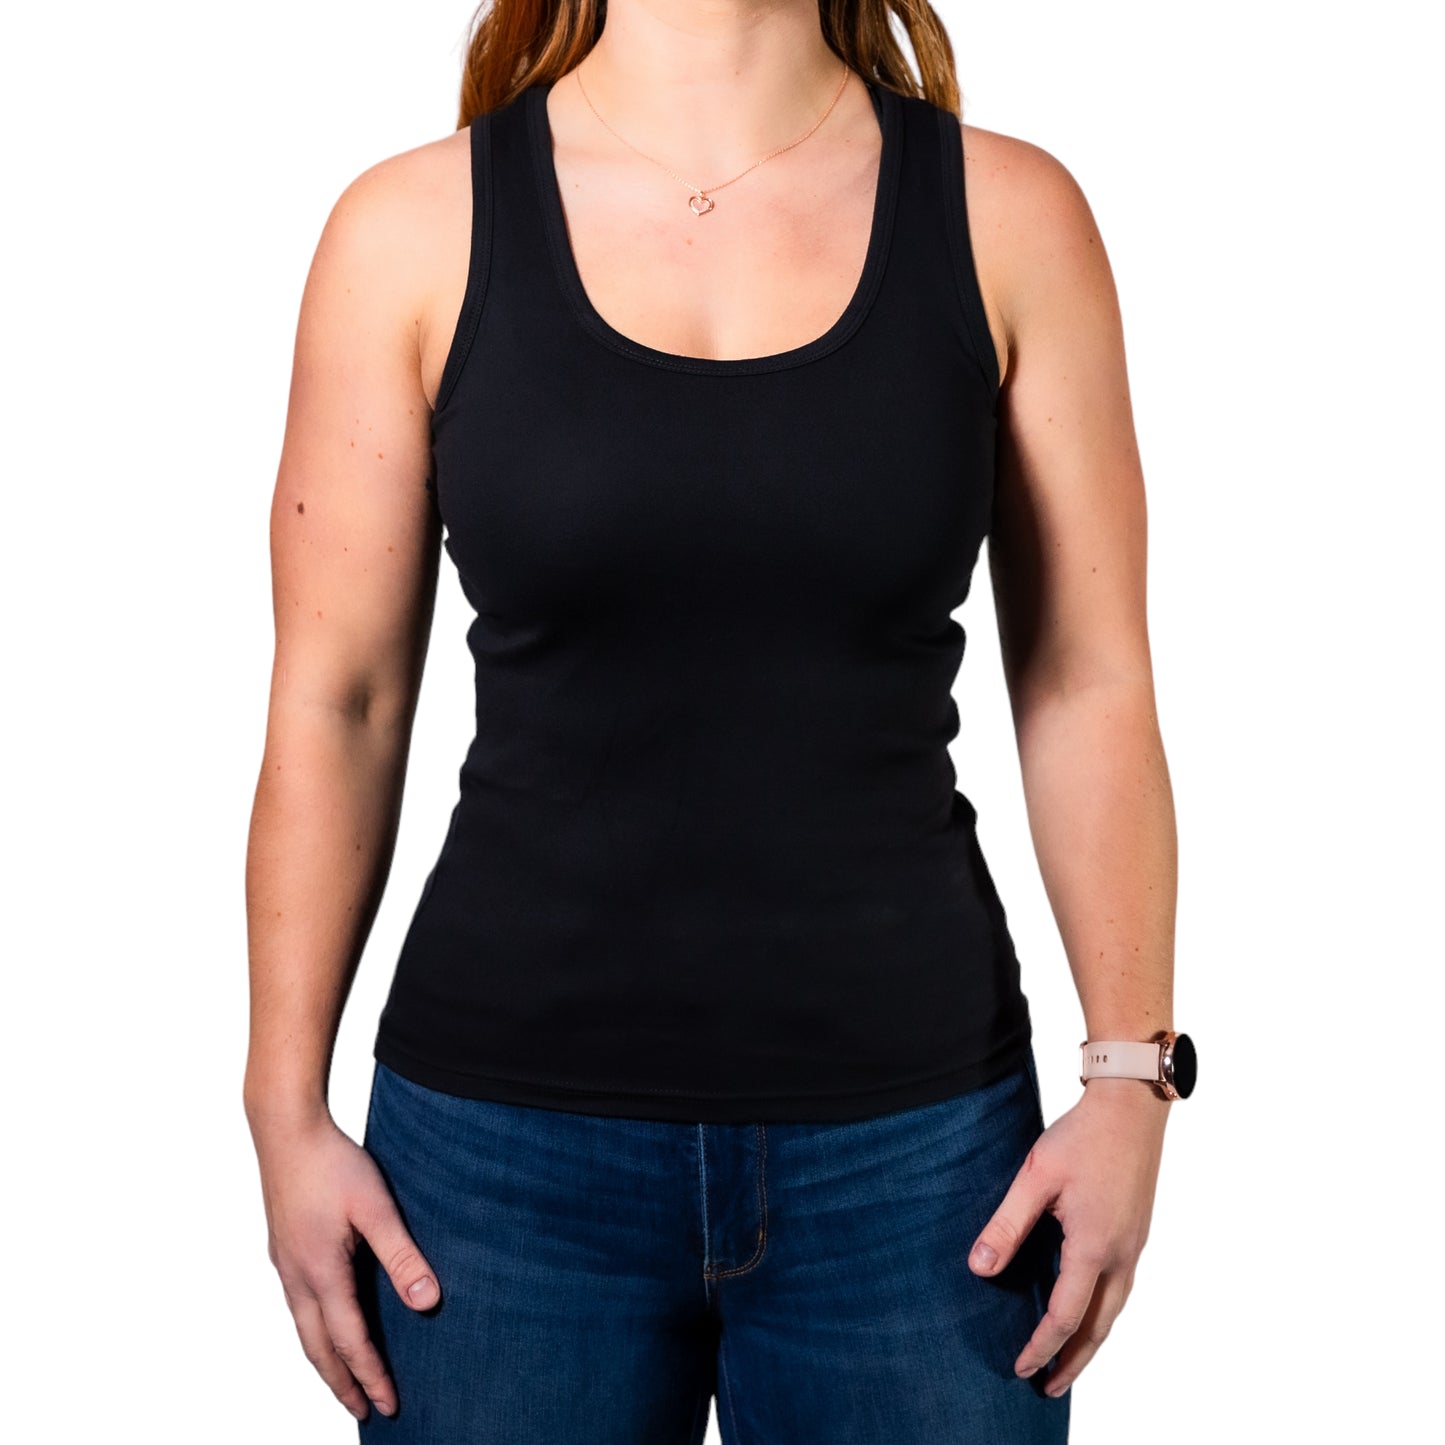 S&M Diesel Woman’s sporty tank top- 5 color options avail